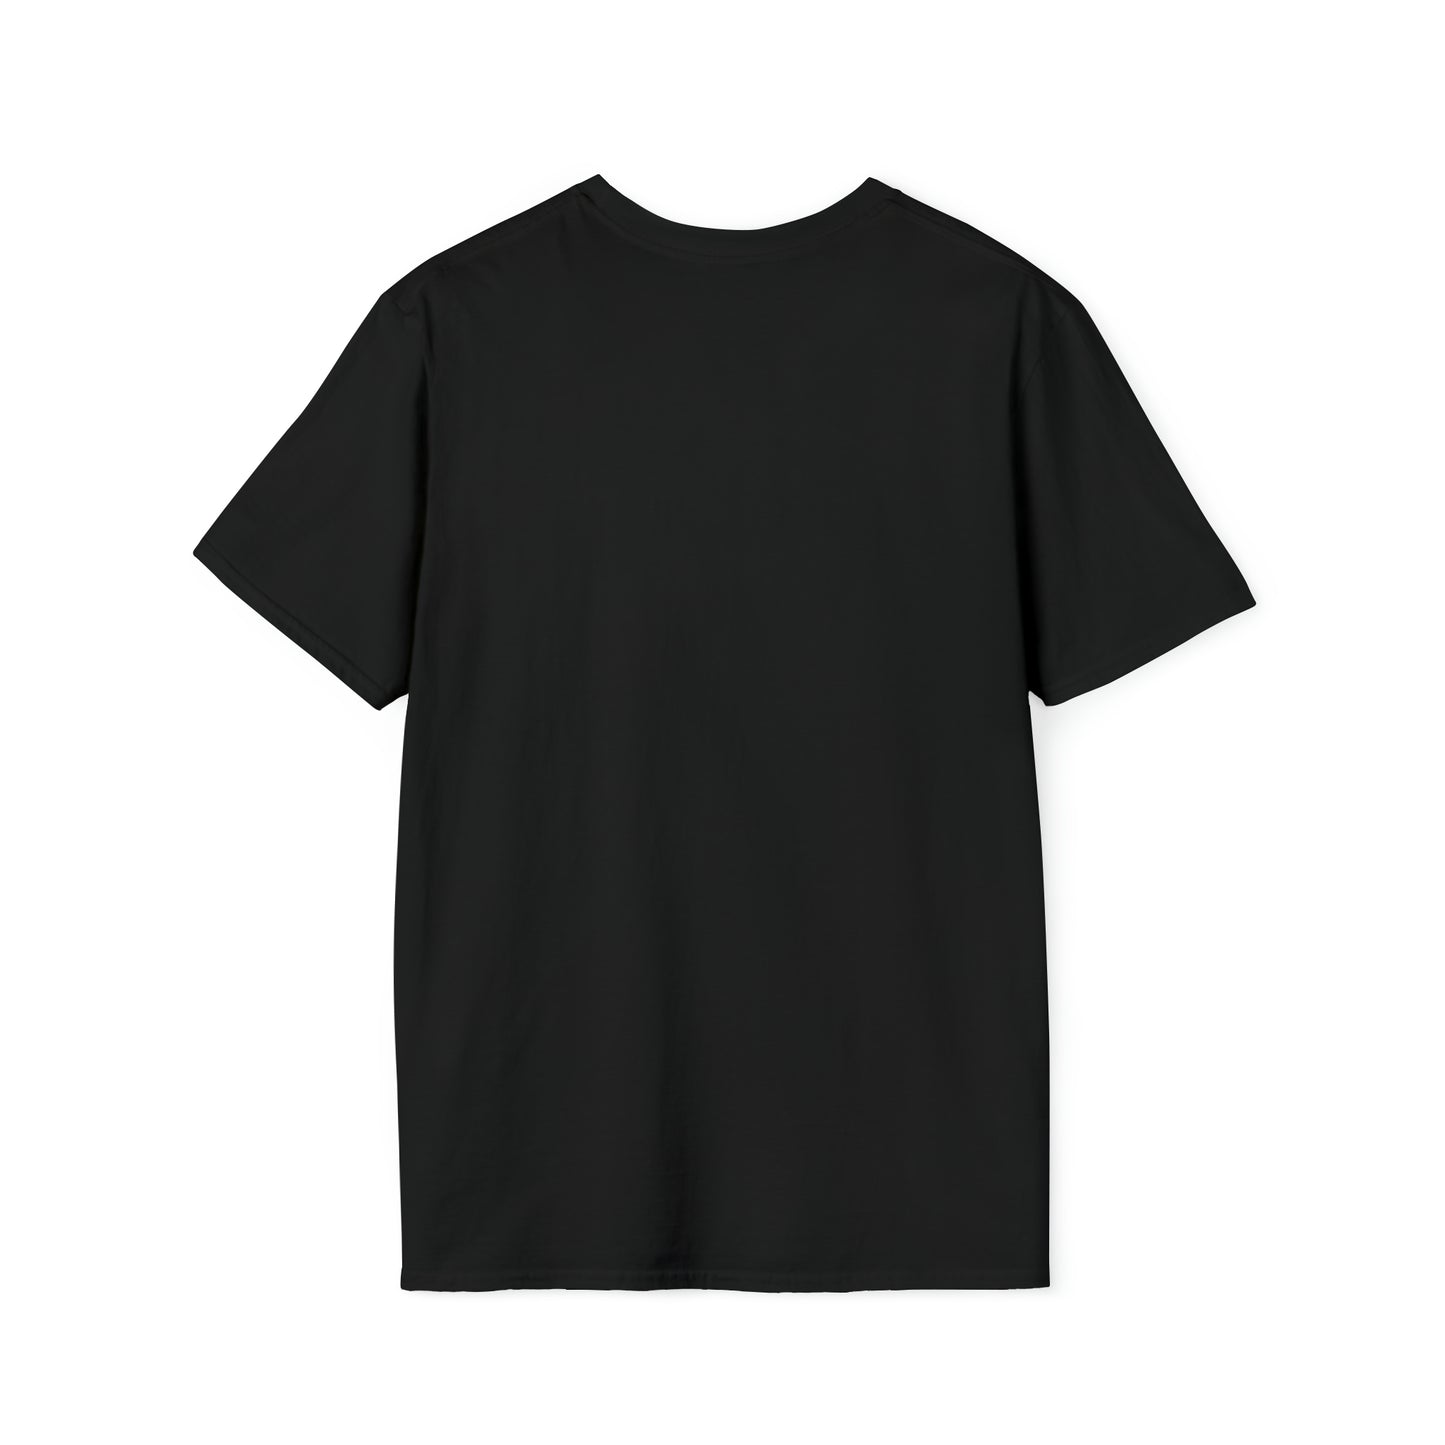 The Dance Connectionc Unisex Softstyle T-Shirt